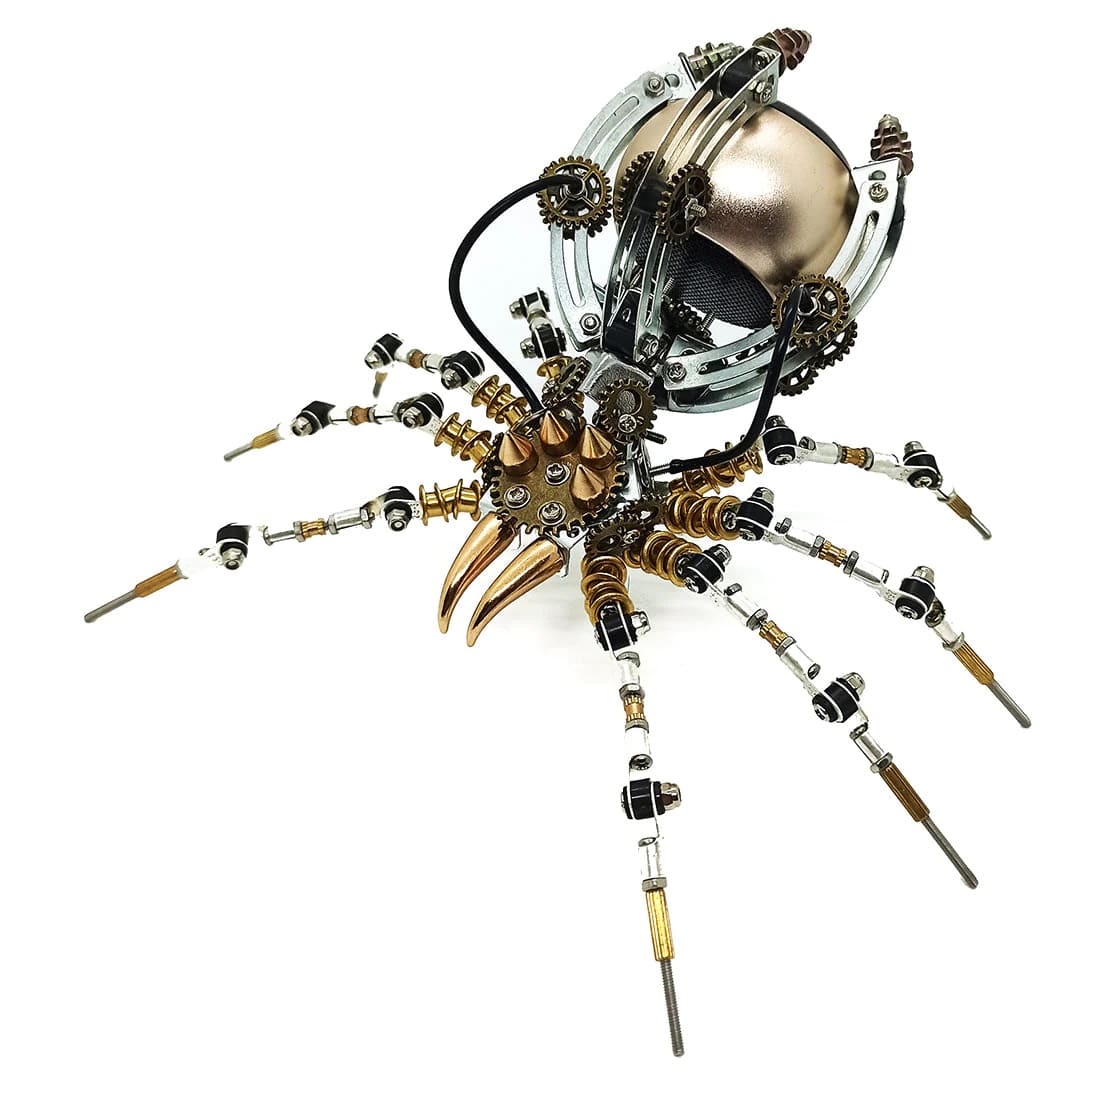 3D puzzle for adults - 3D puzzle of spiders